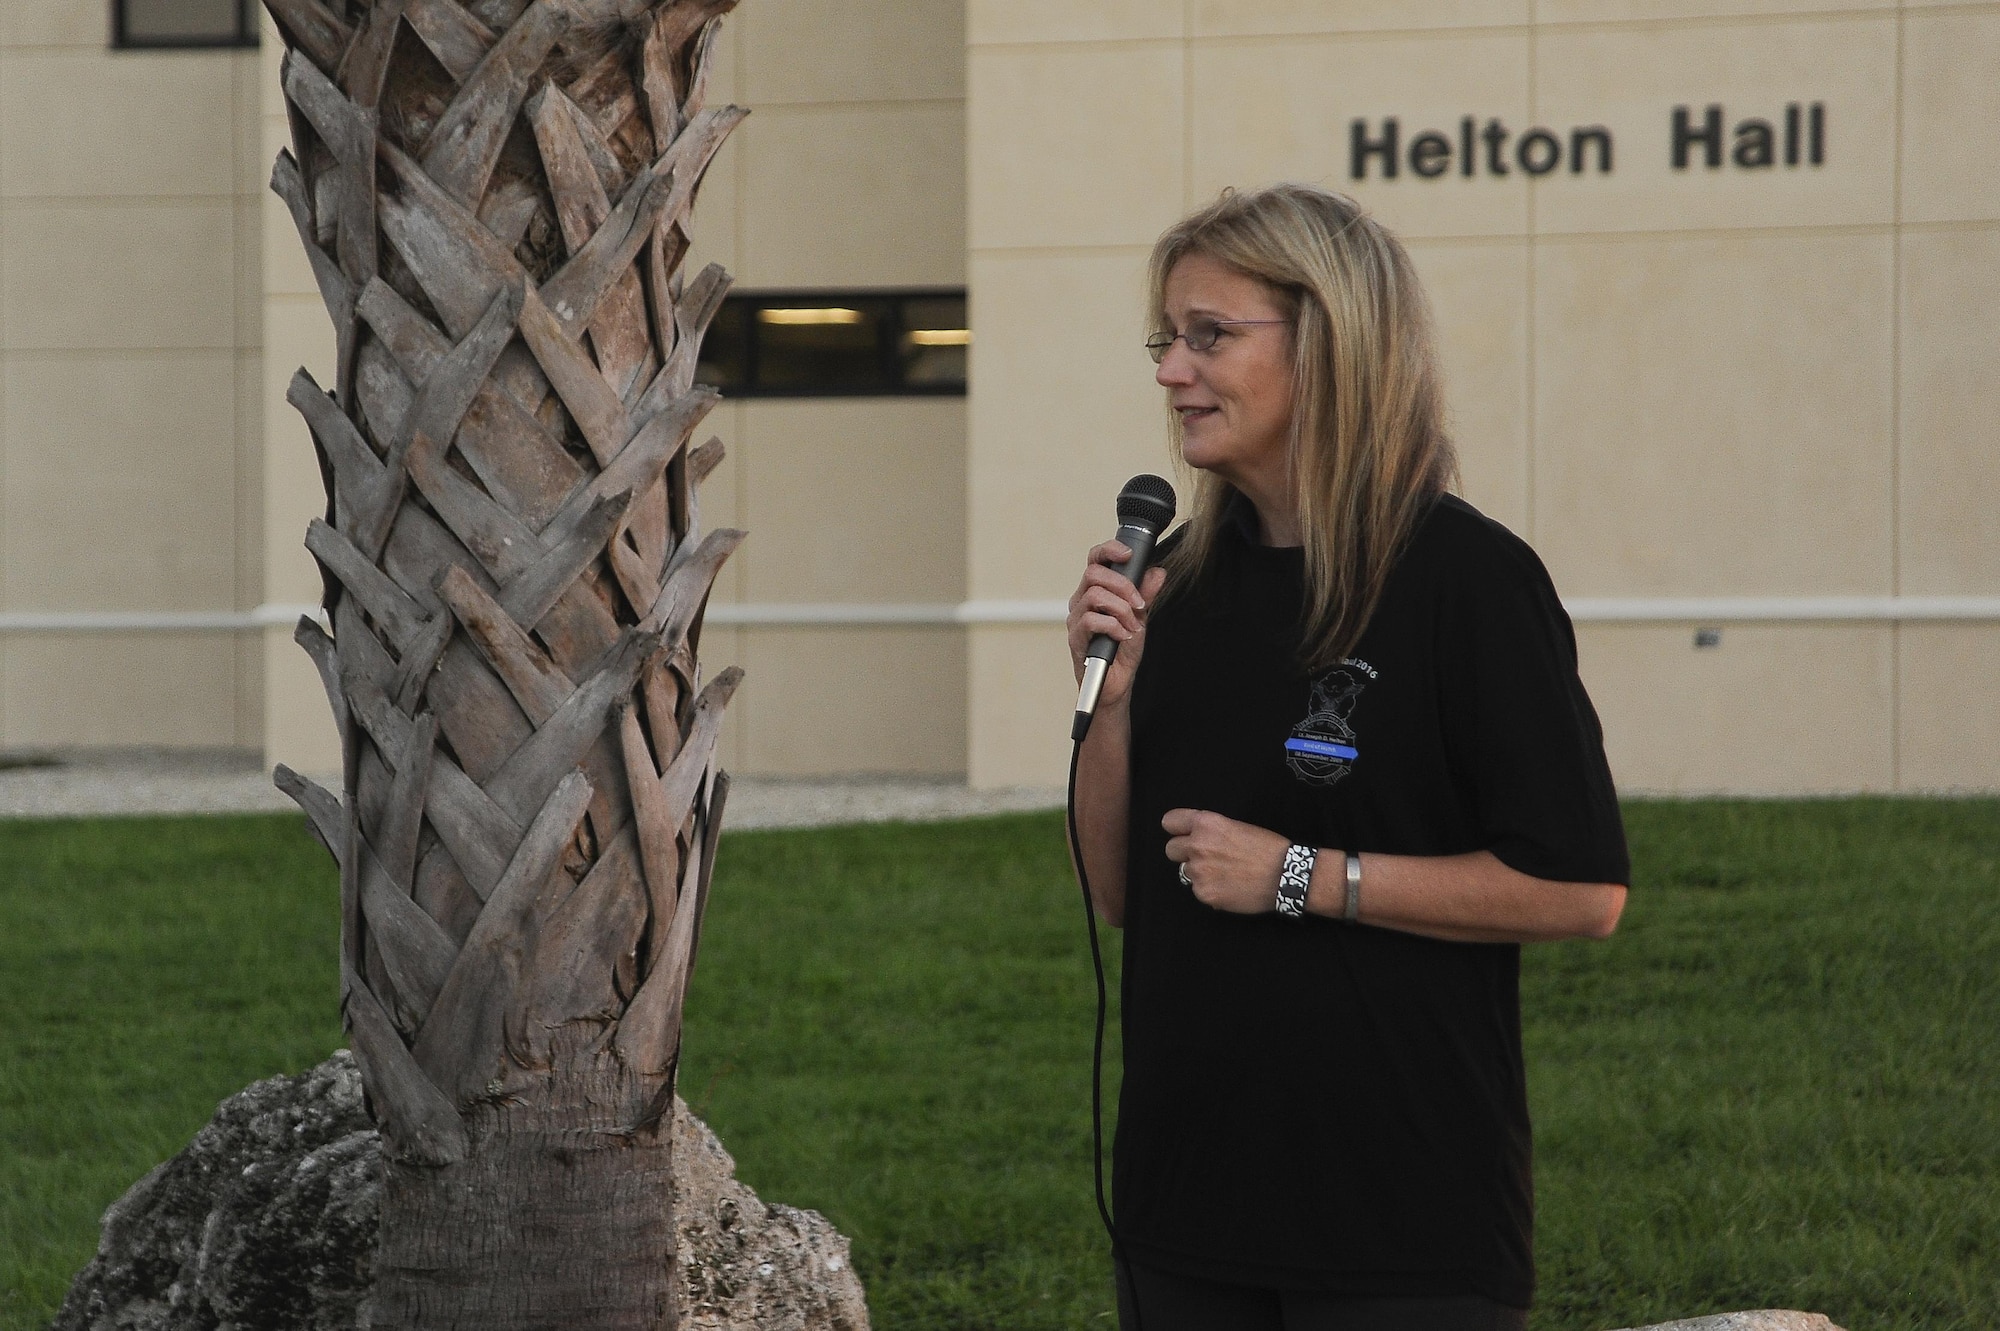 First Lieutenant Joseph D. Helton’s mother, Jiffy, speaks at the 6th Annual Helton Hall Memorial Run at MacDill Air Force Base, Fla., Sept. 8, 2016. The annual run is held in memory of Helton, a security forces officer assigned to the 6th Security Forces Squadron, who was killed during his deployment to Iraq in 2009. (U.S. Air Force photo by Airman 1st Class Mariette Adams)